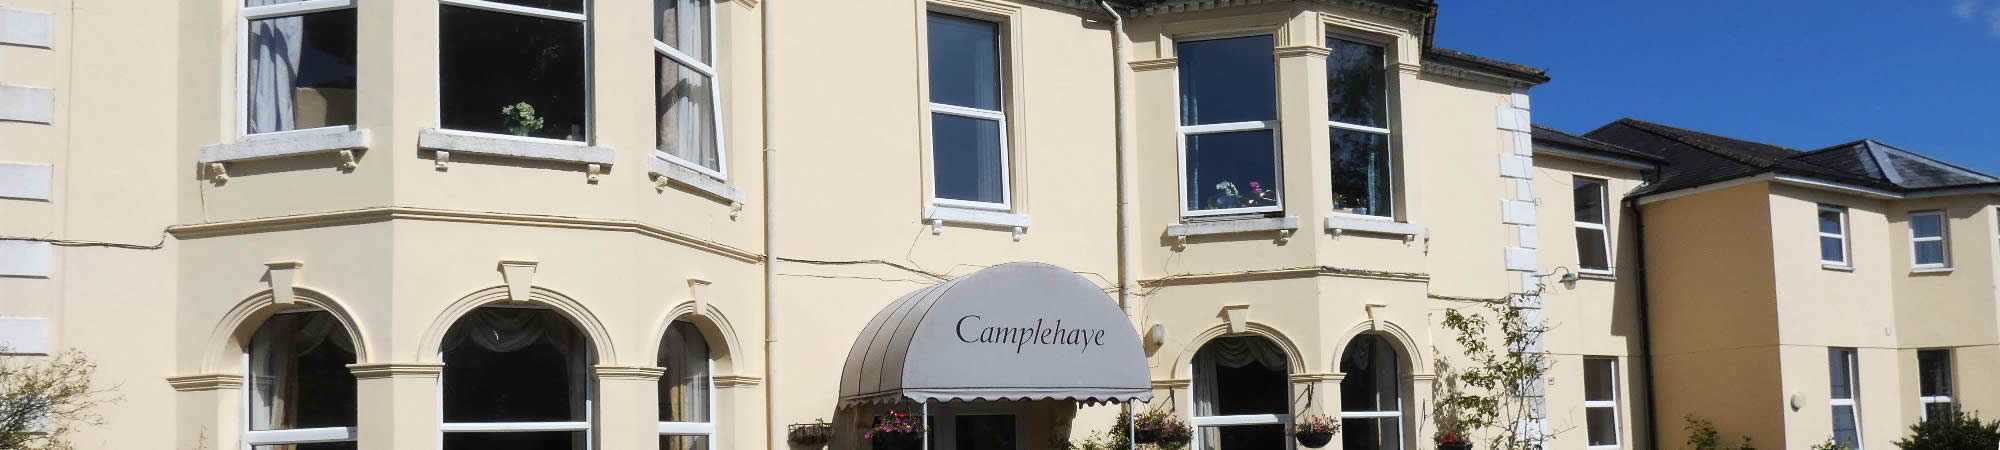 The entrance to Camplehaye Residential Home